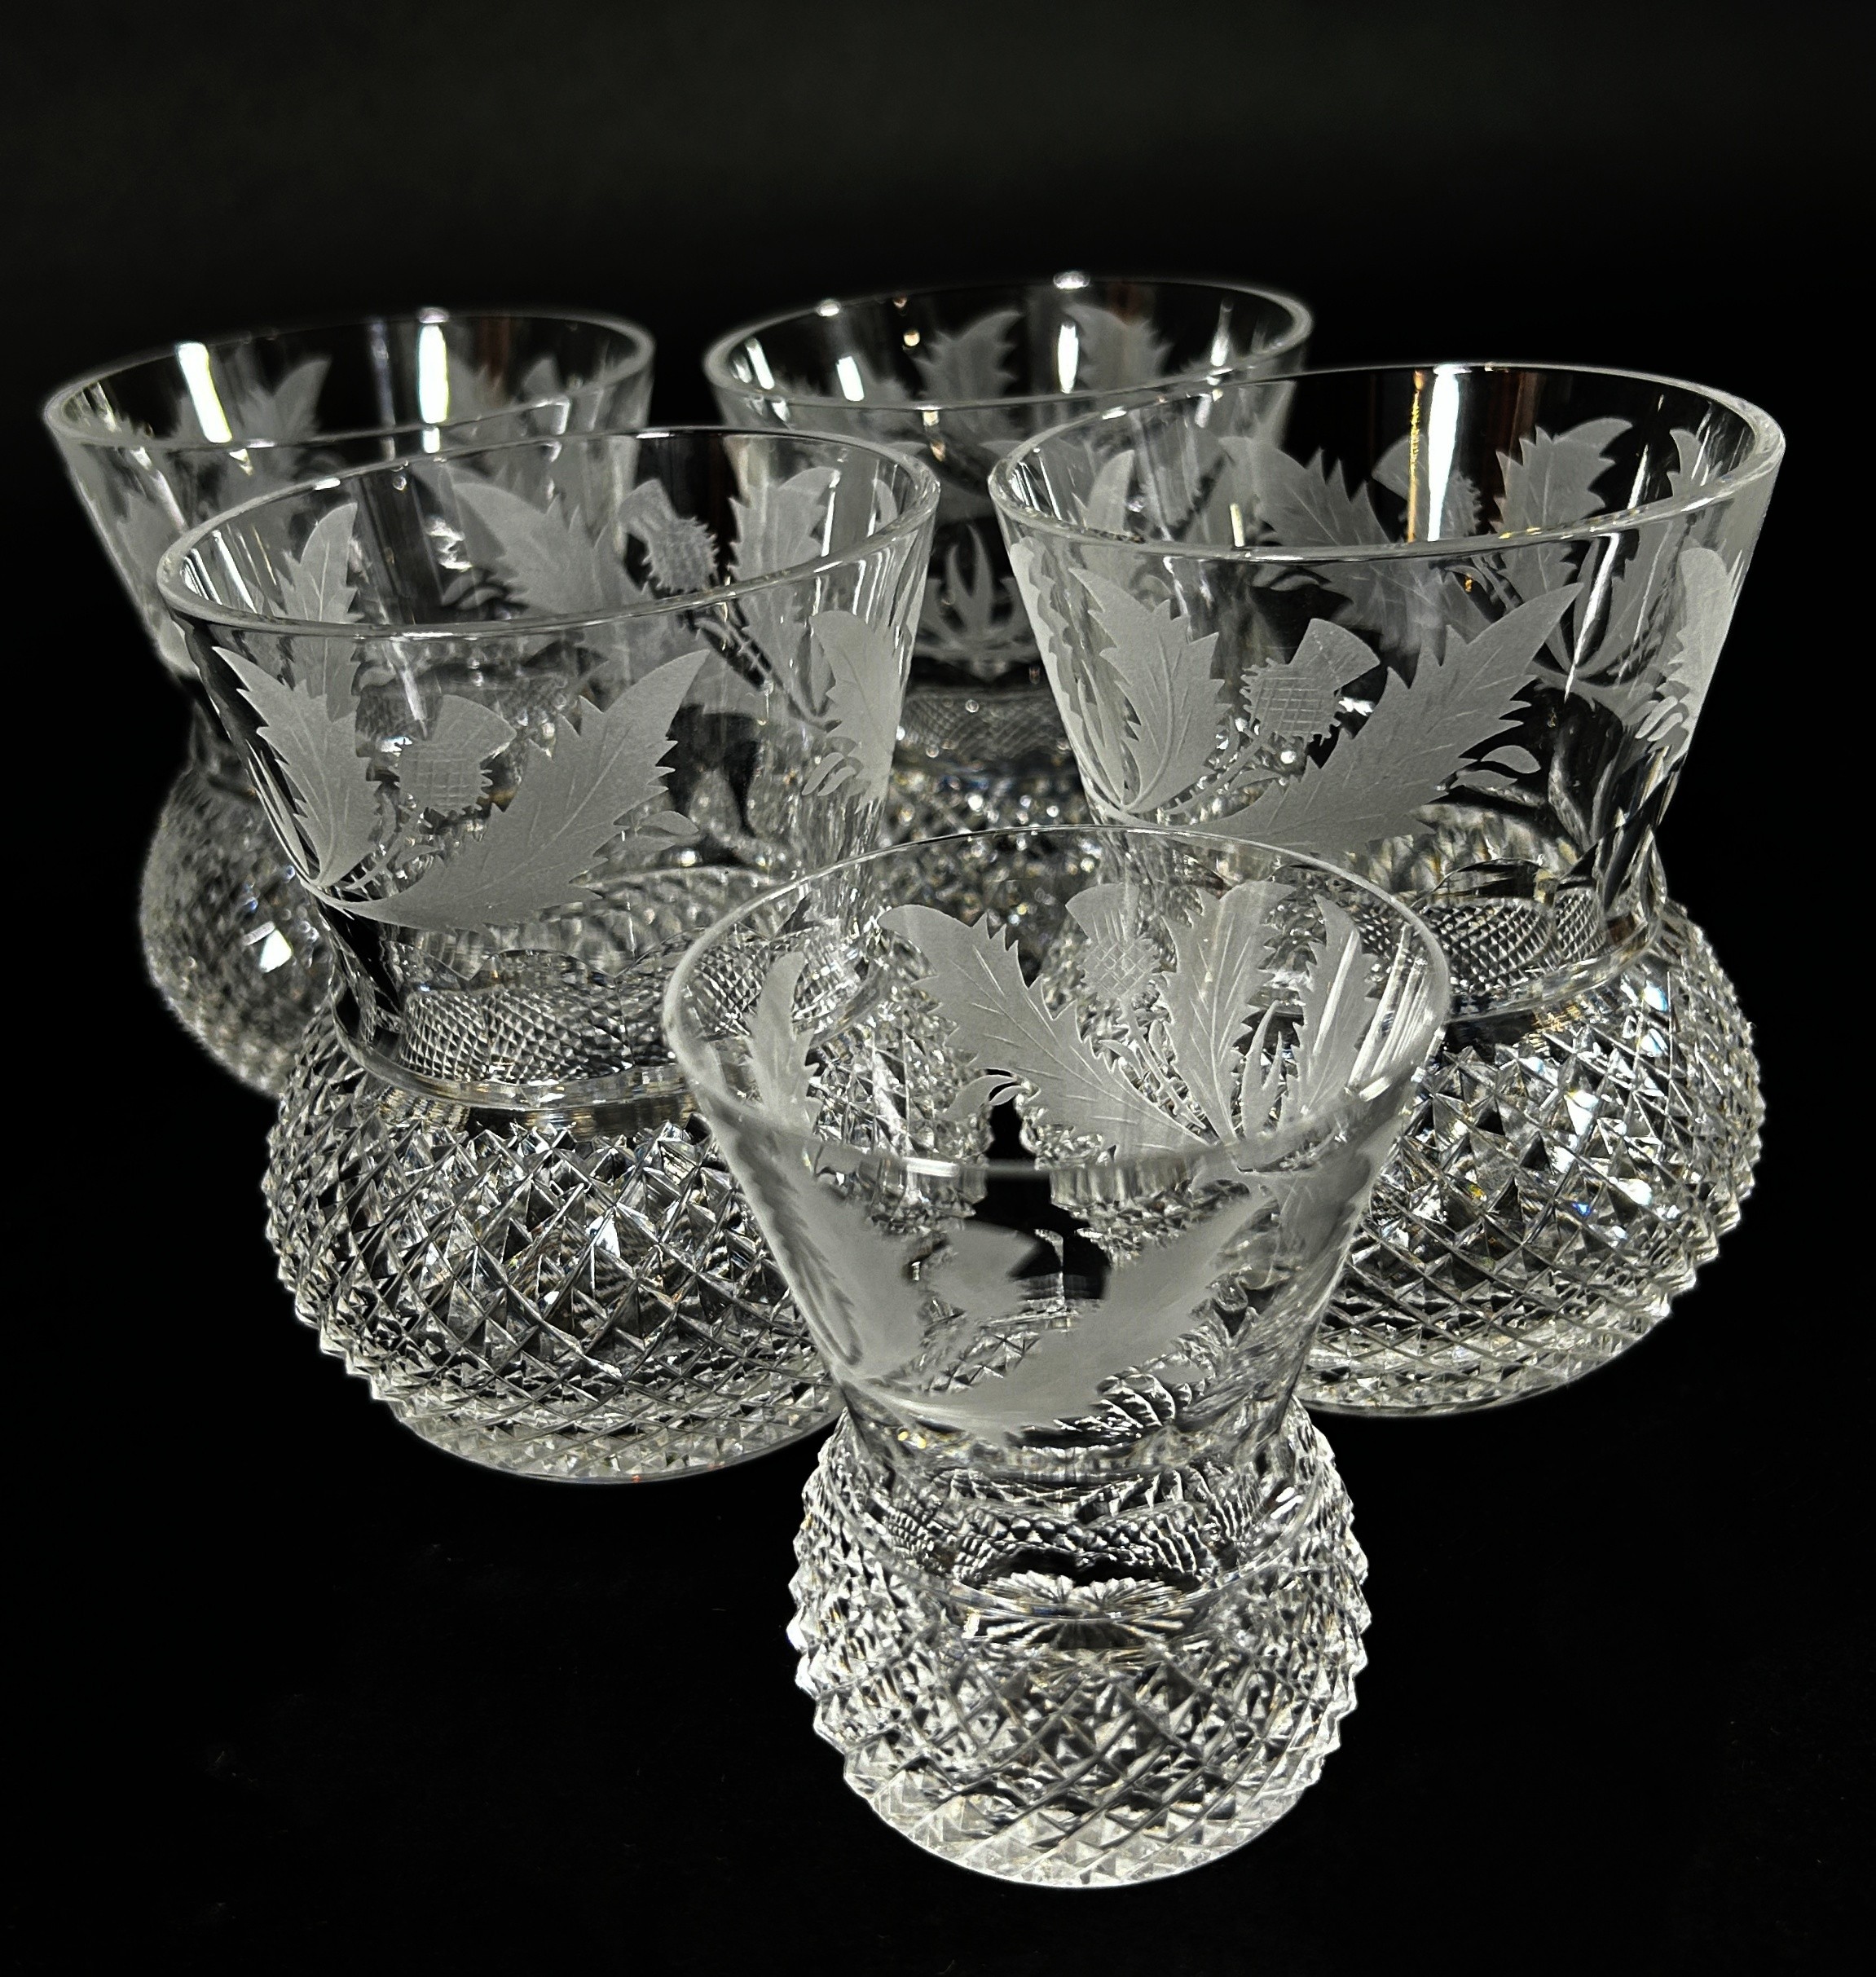 Four Edinburgh Crystal Thistle Whisky Glasses, a single shot glass and two brandy balloons to match,